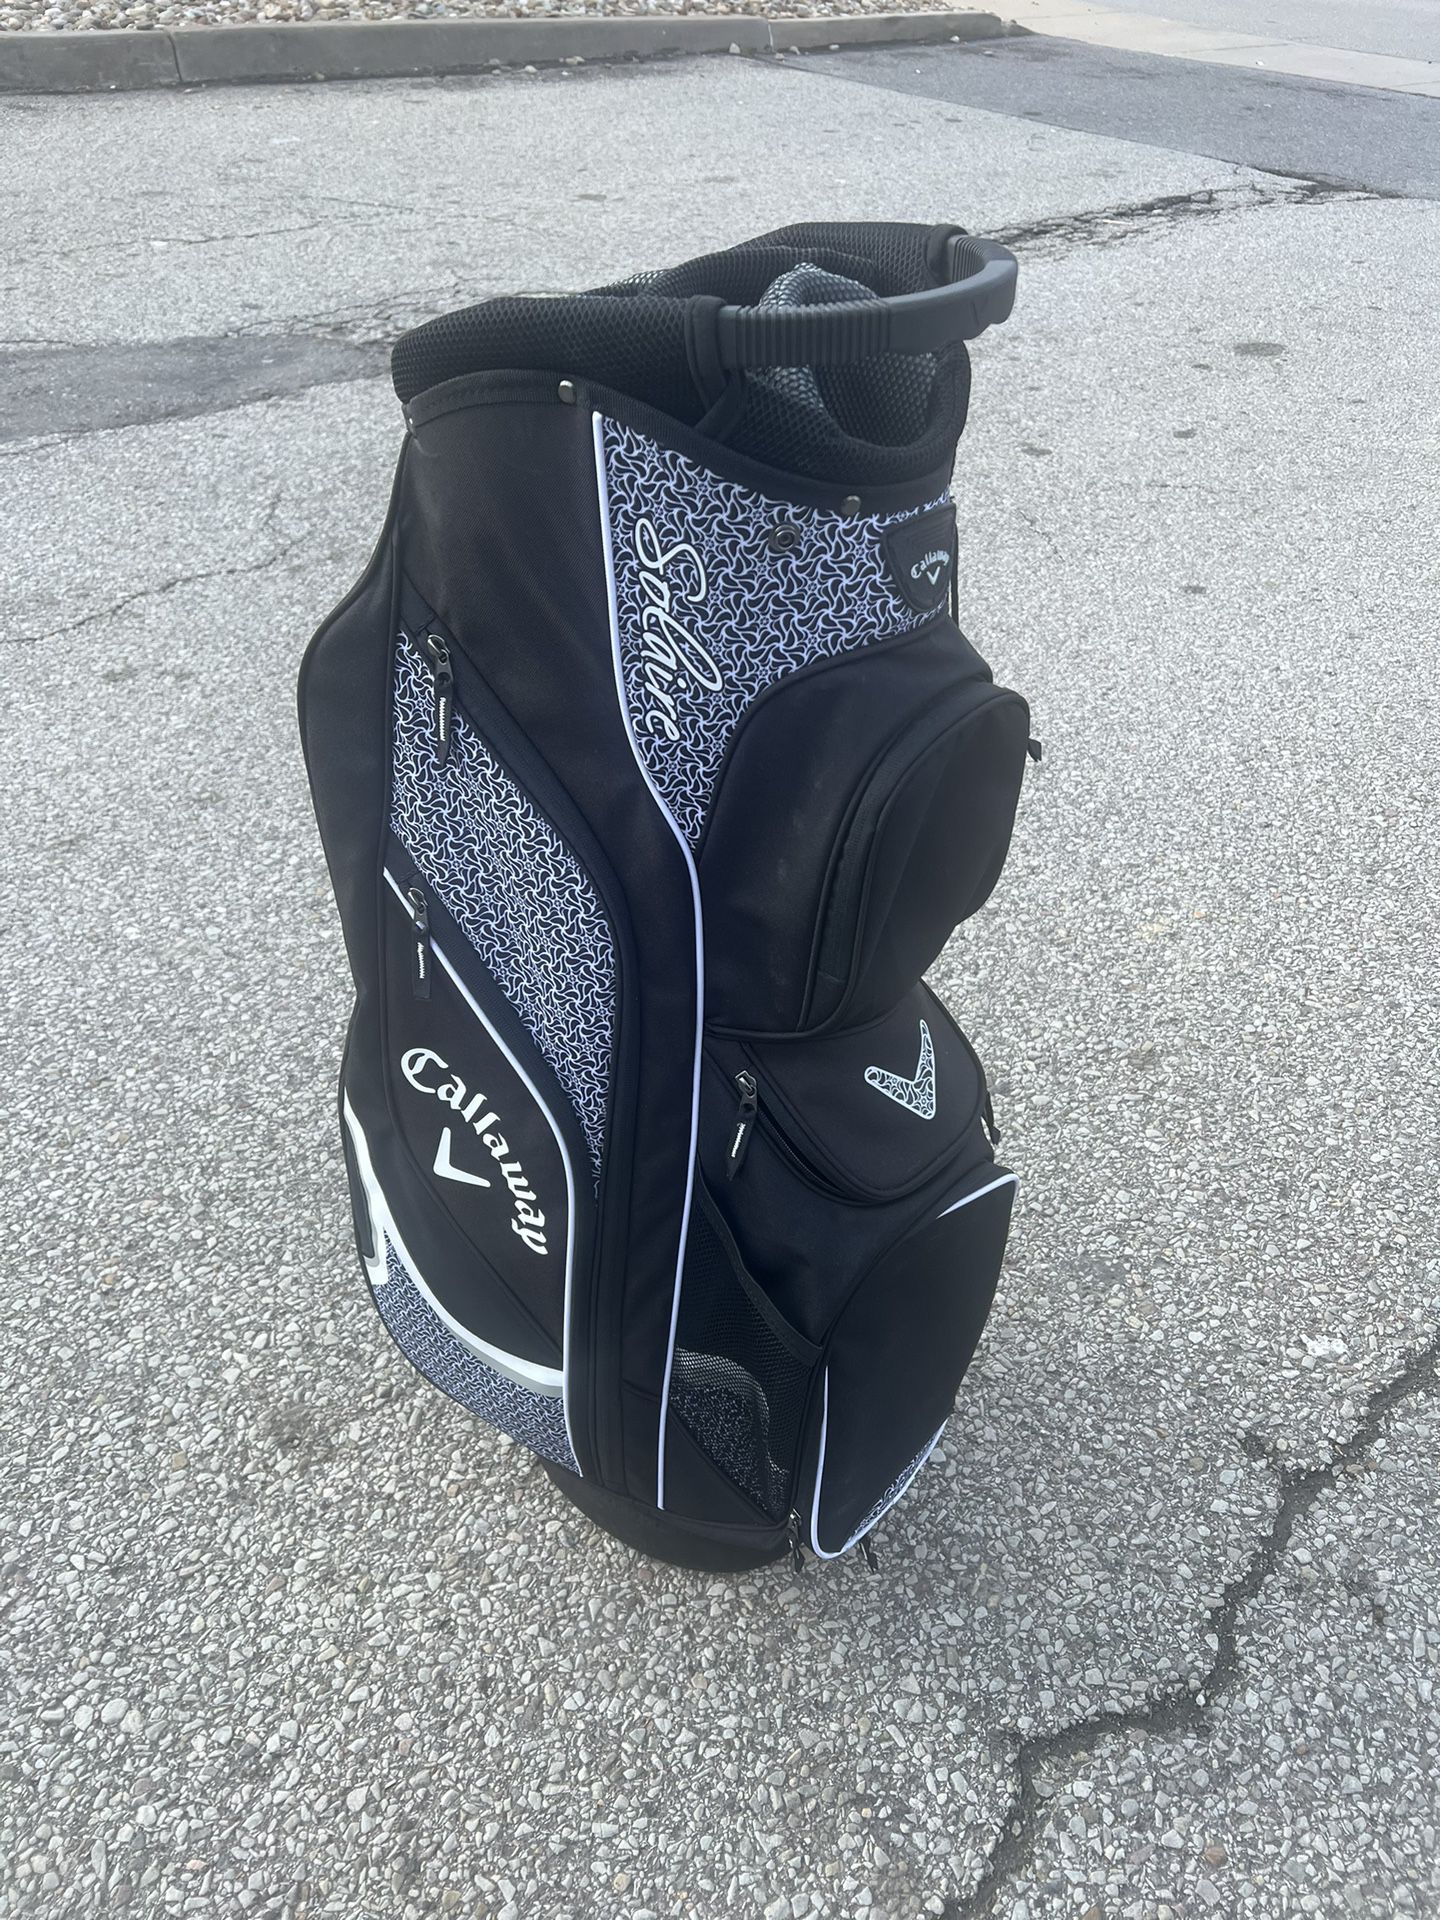 CALLAWAY SOLAIRE Golf Cart Bag with 14 Dividers and Rain Cover LIKE NEW! PICK UP IN CORNELIUS